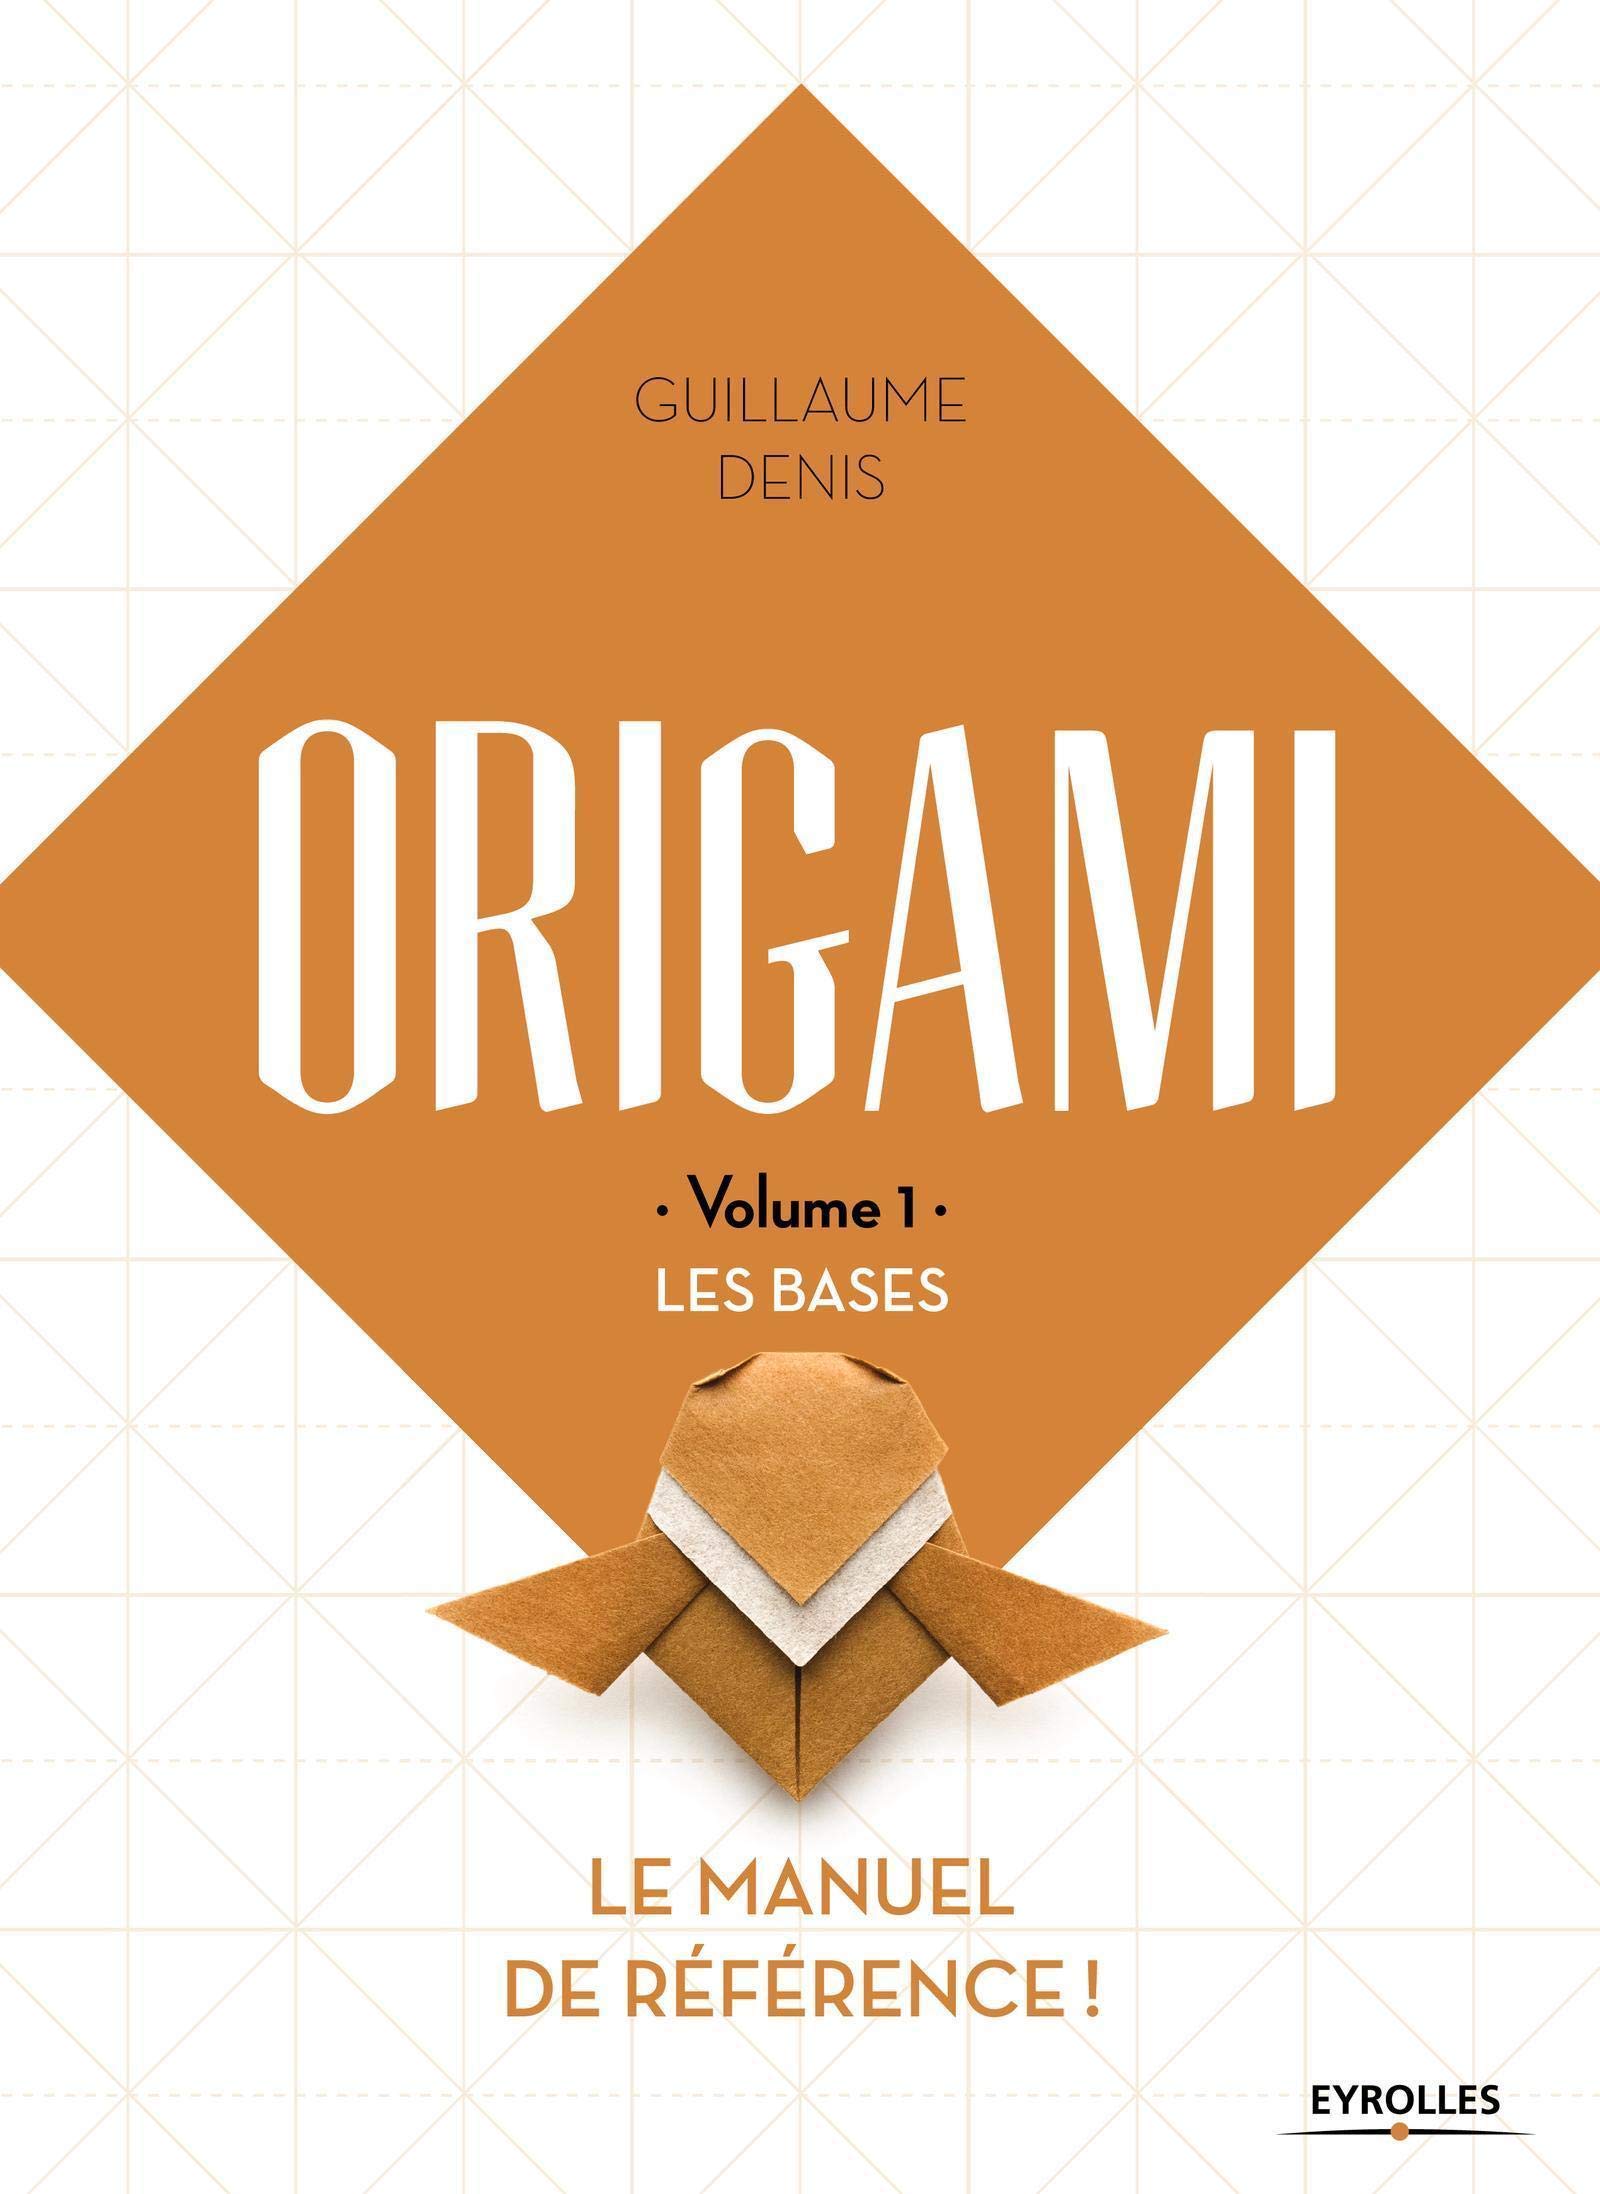 ORIGAMI - Volume 1 - LES BASES : page 200.